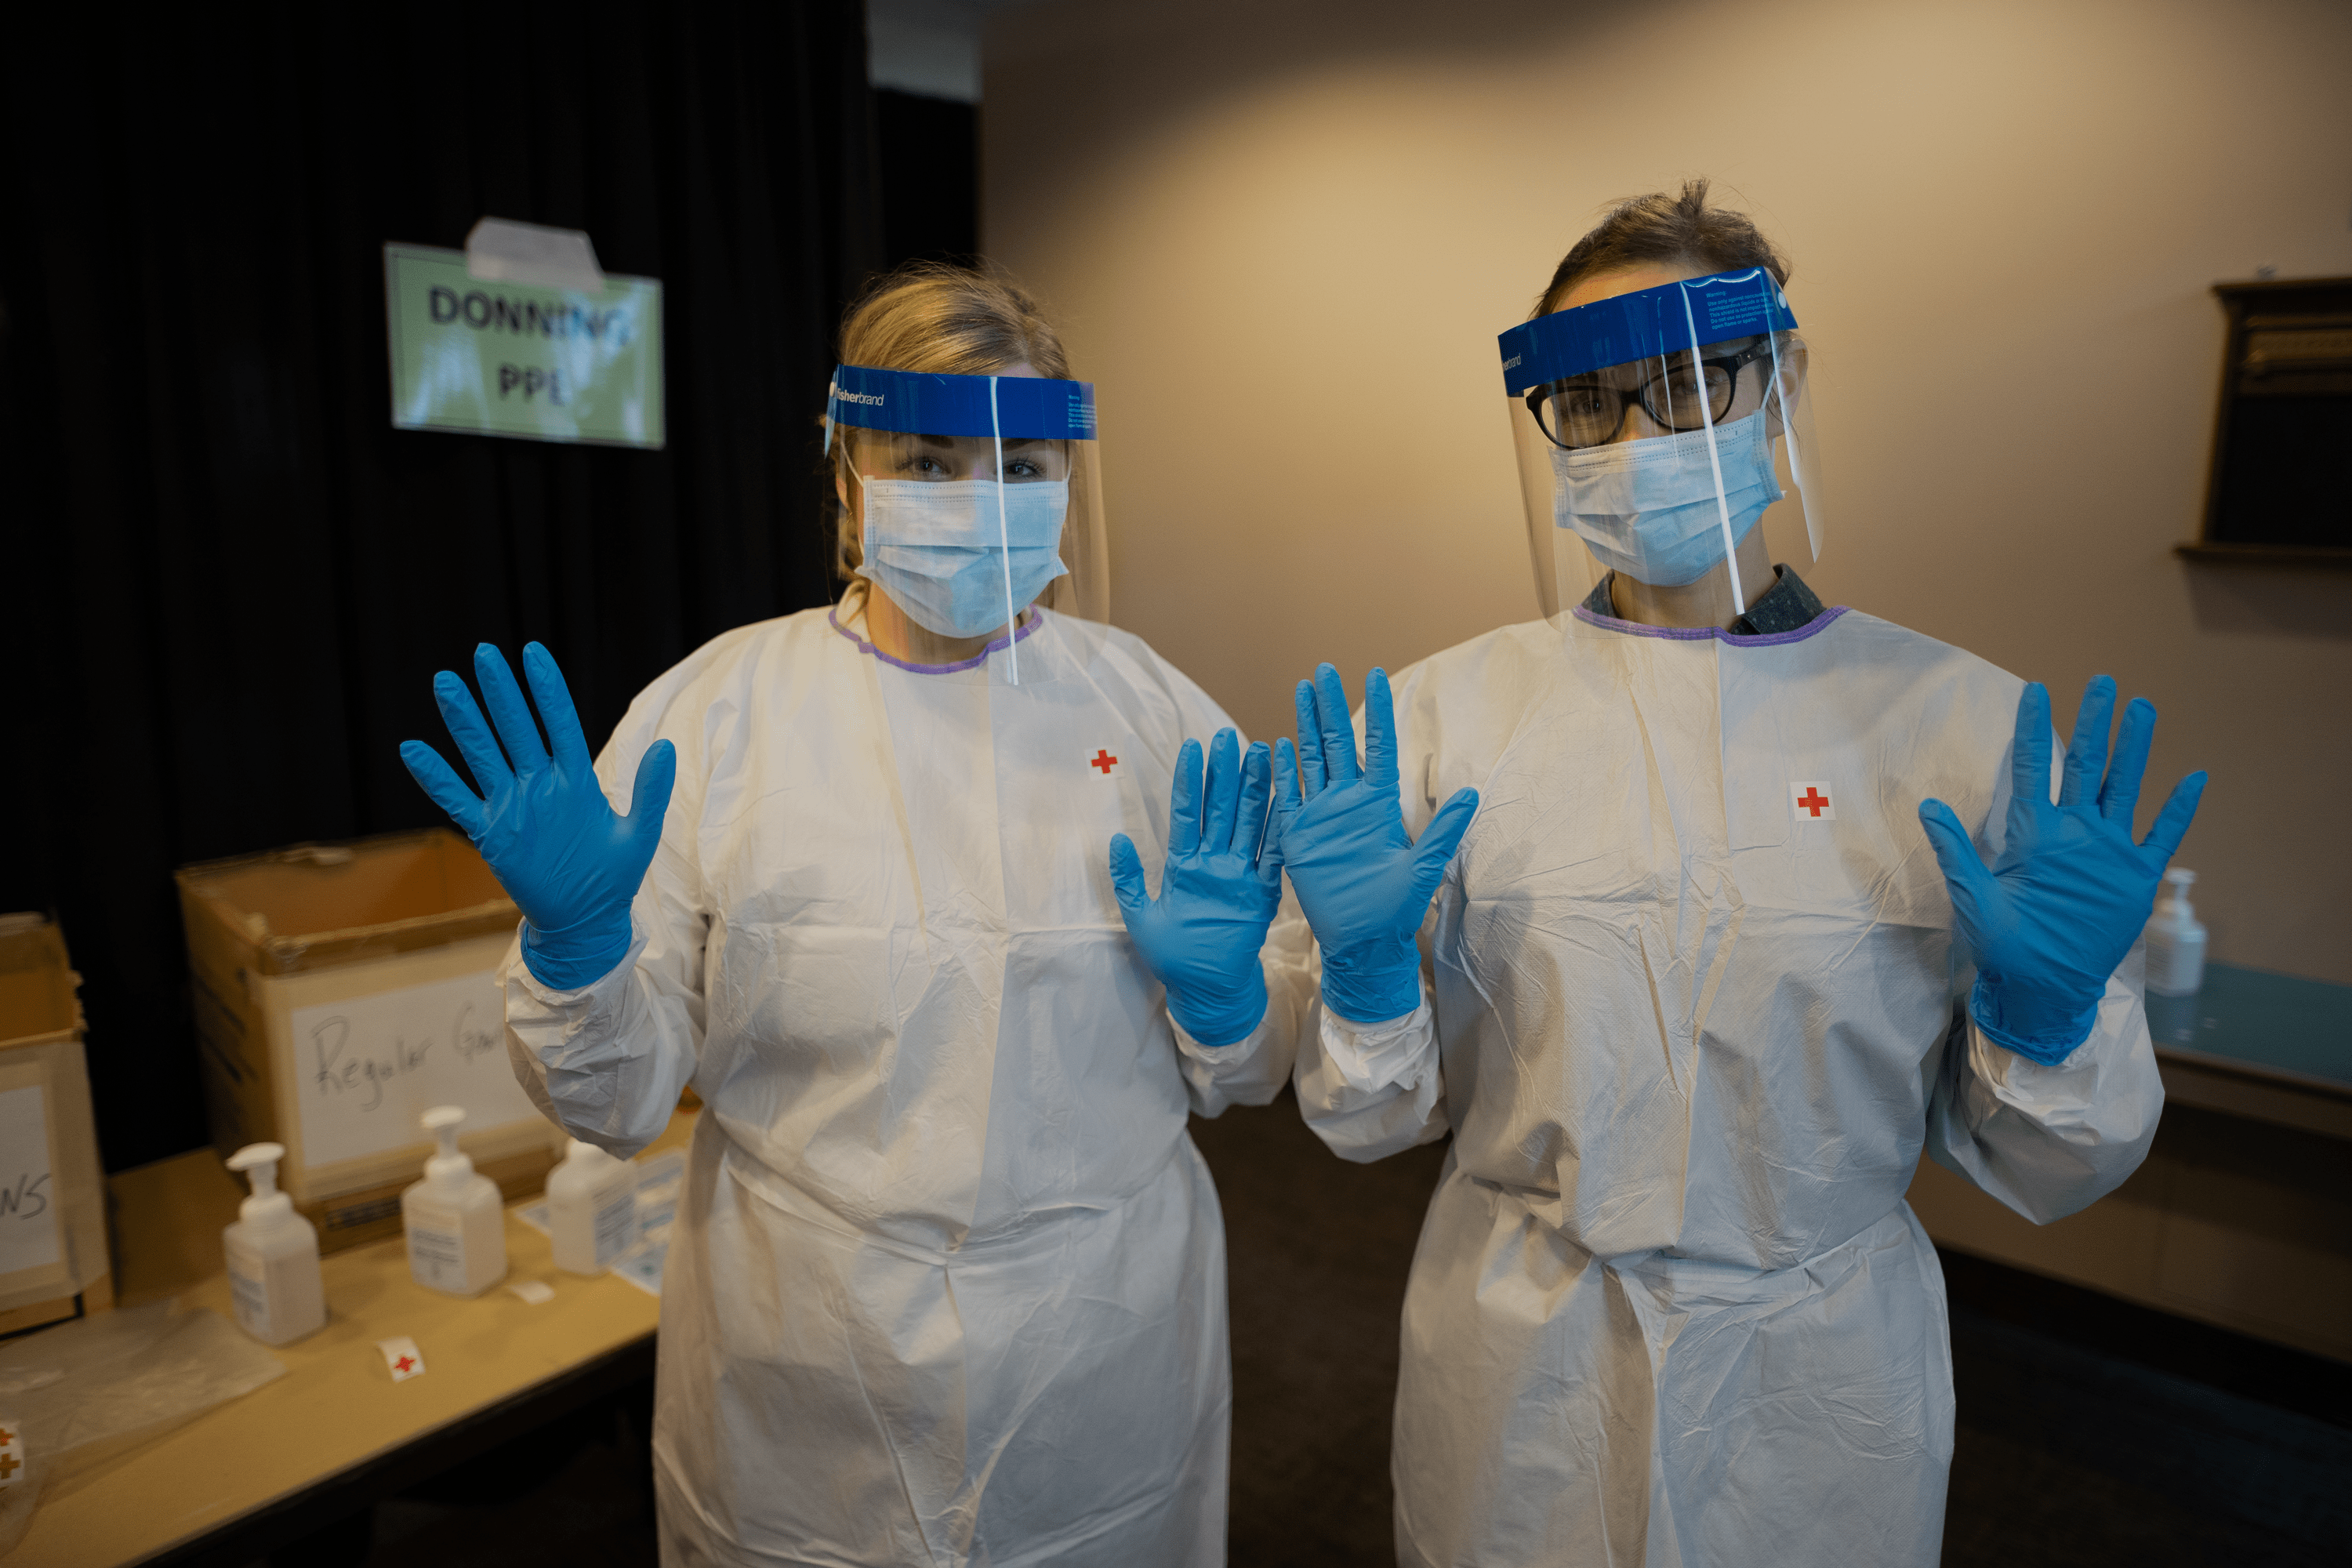 Two people standing next to each other wearing gloves, masks, and gowns for personal protective equipment.